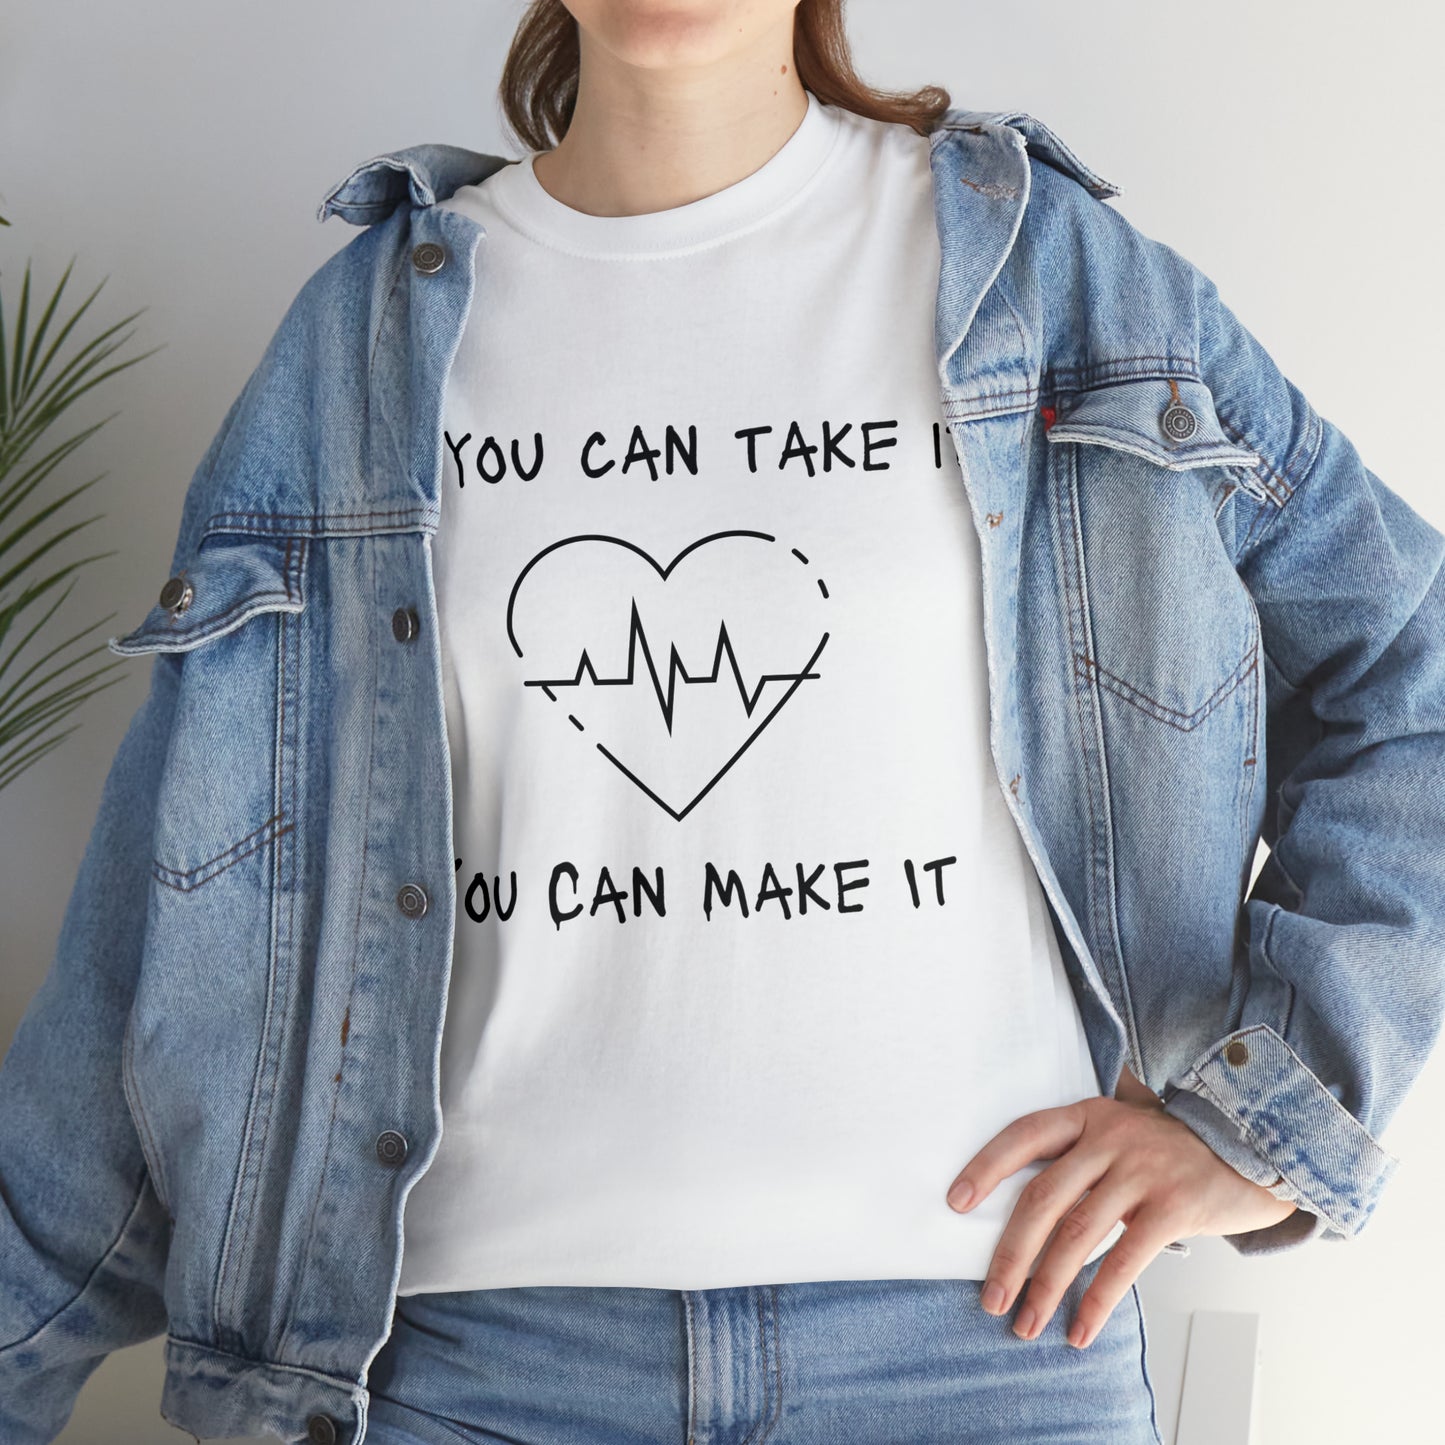 "If You Can Take It, You Can Make It" T-Shirt - Weave Got Gifts - Unique Gifts You Won’t Find Anywhere Else!